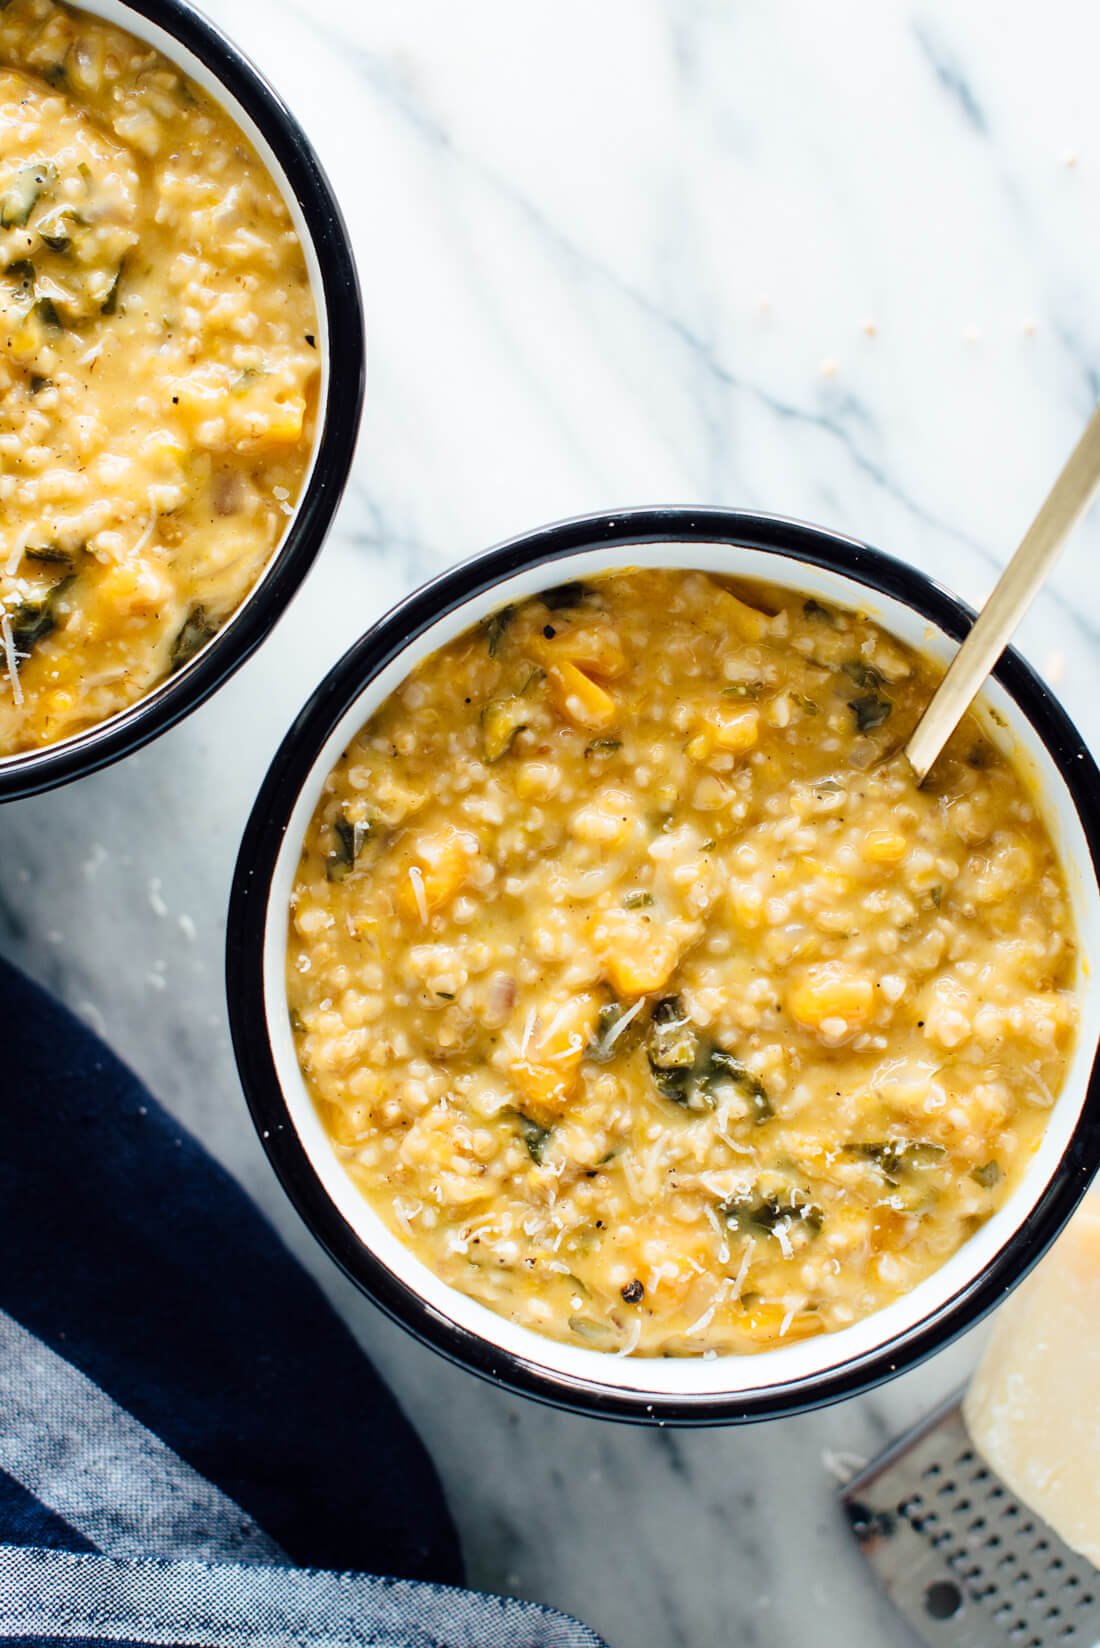 Butternut squash and kale steel cut oat "risotto" is absolutely delicious! Try and you'll see. #dinnerrecipe